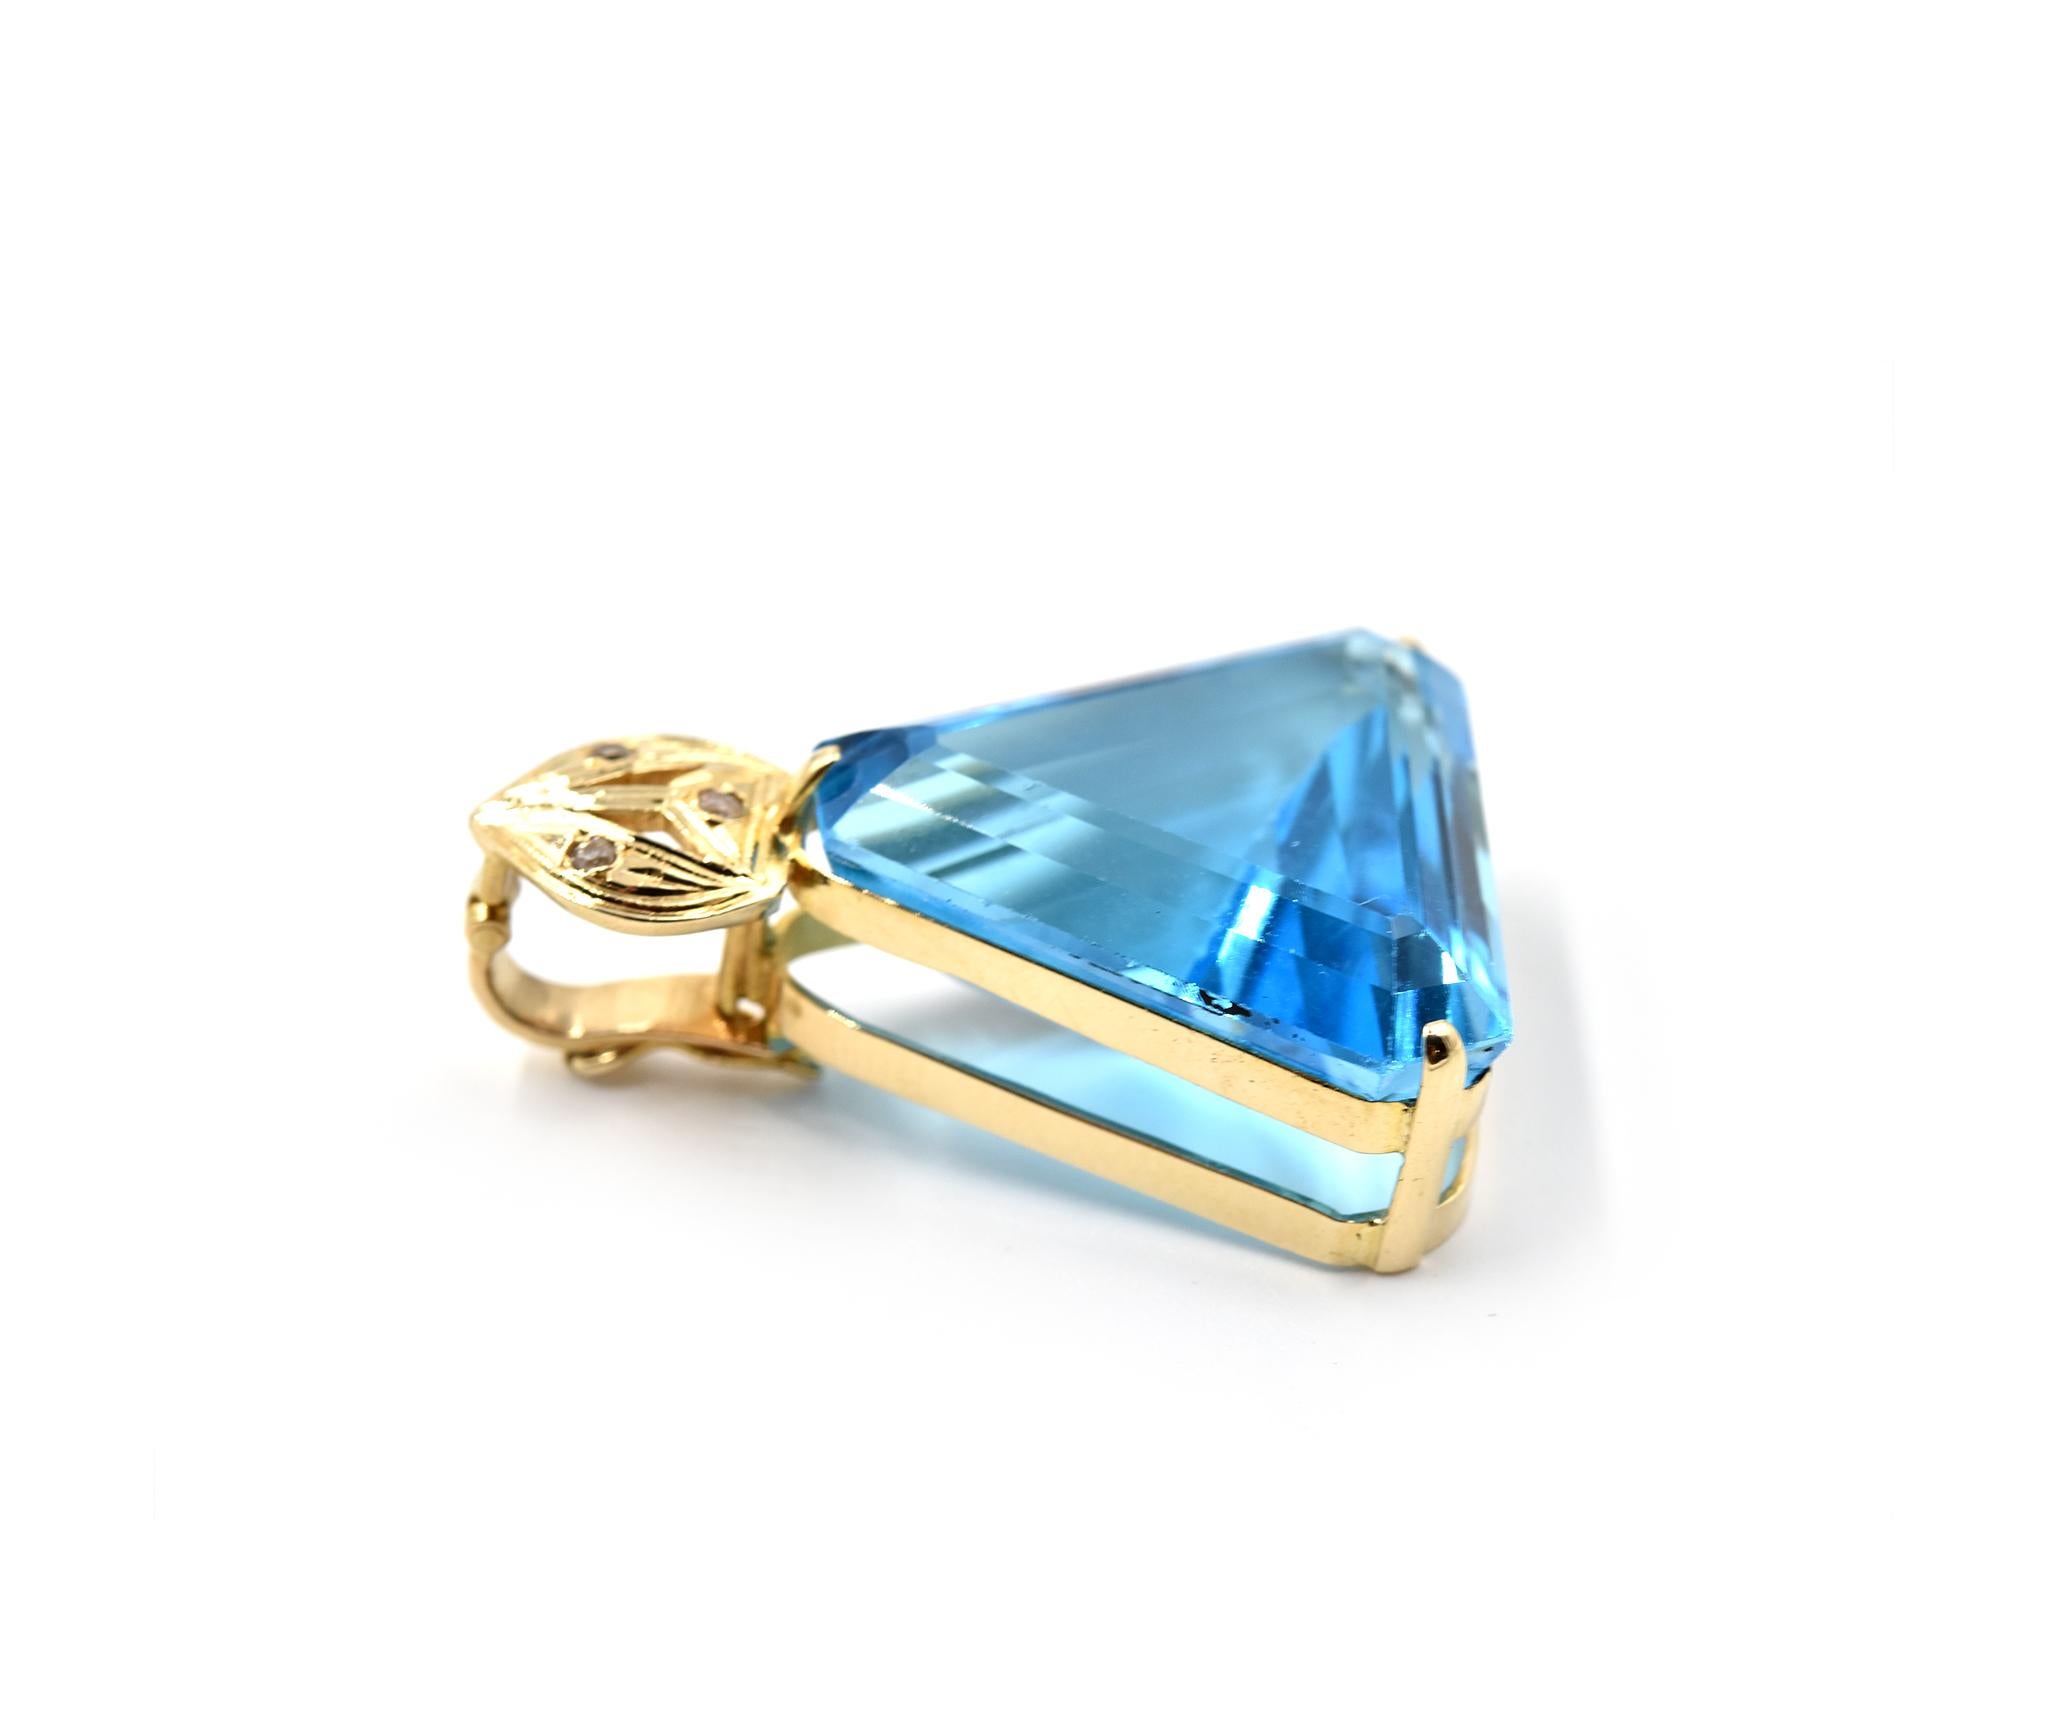 Designer: custom design
Material: 14k yellow gold
Blue Topaz: trilliant cut 30.00 carat swiss blue topaz
Diamonds: three round brilliant cut = 0.01 carat total weight
Dimensions: pendant is 1 1/2-inch long and 1-inch wide
Weight: 12.57 grams 

